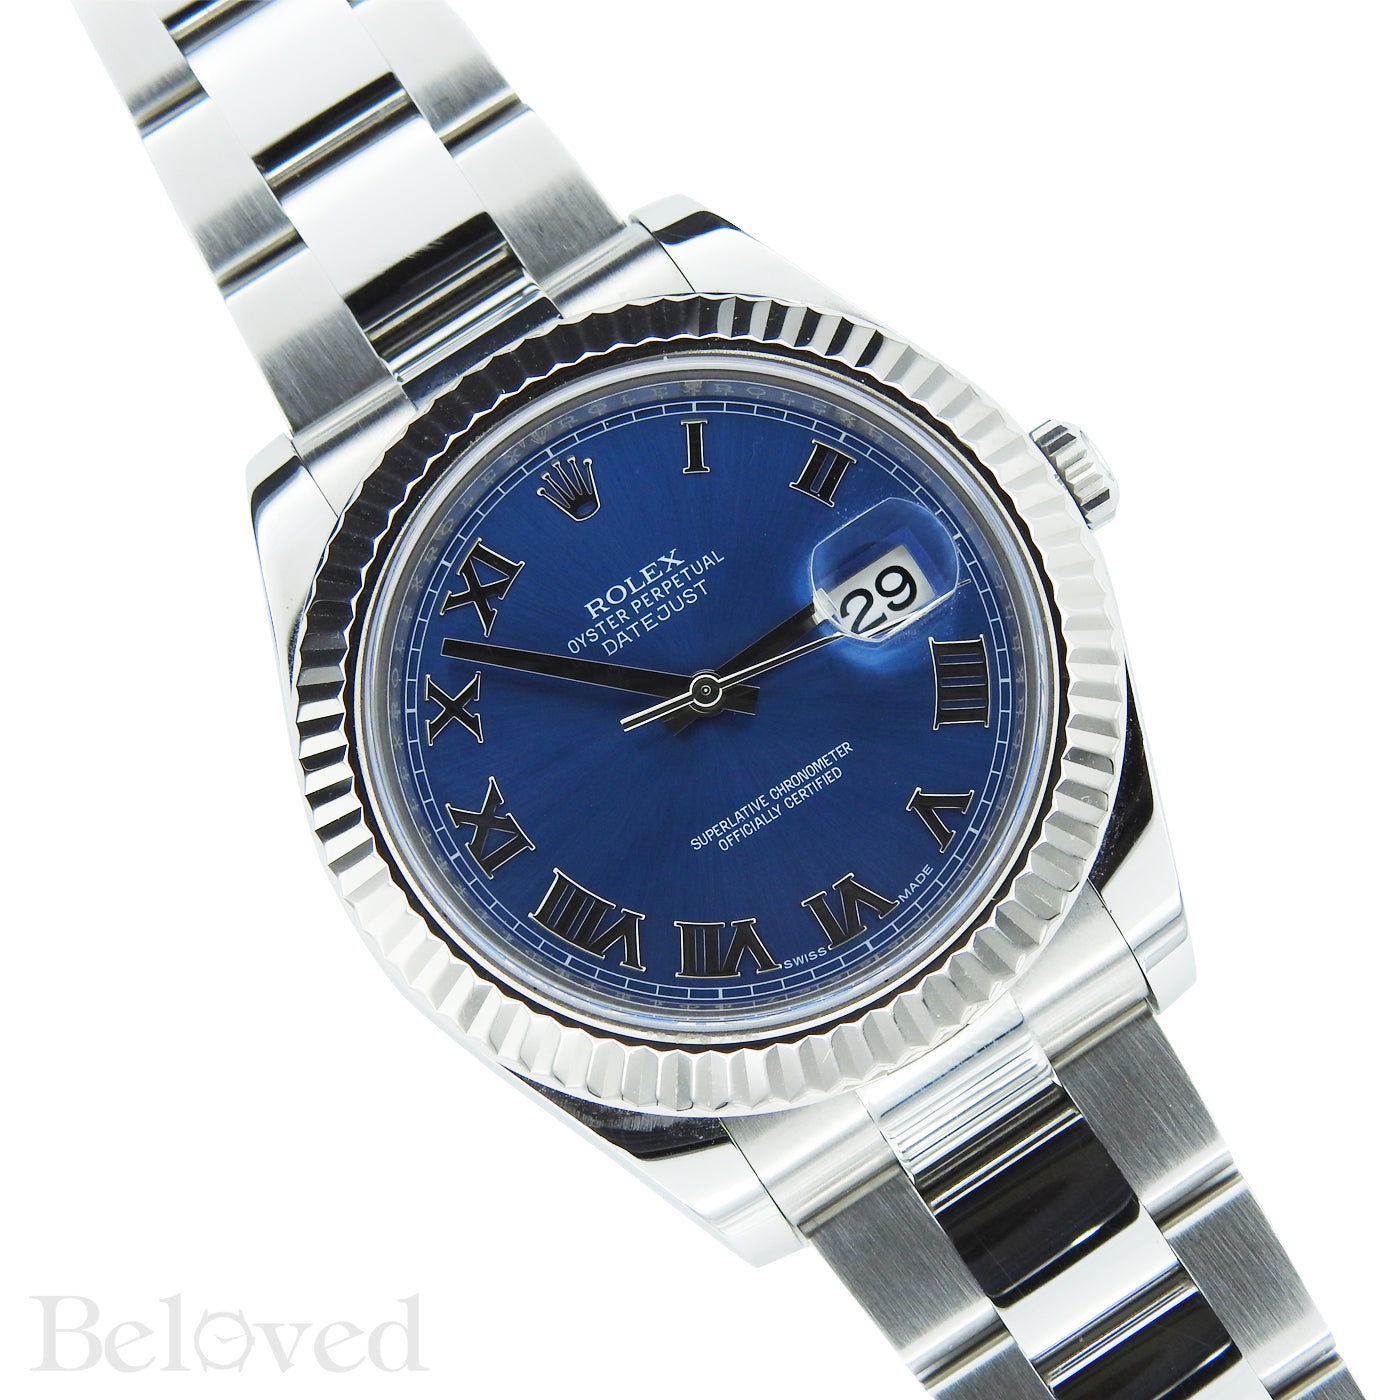 Rolex Datejust II 116334 Blue Roman Dial with Five Year Warranty Card and Rolex Box Image 4